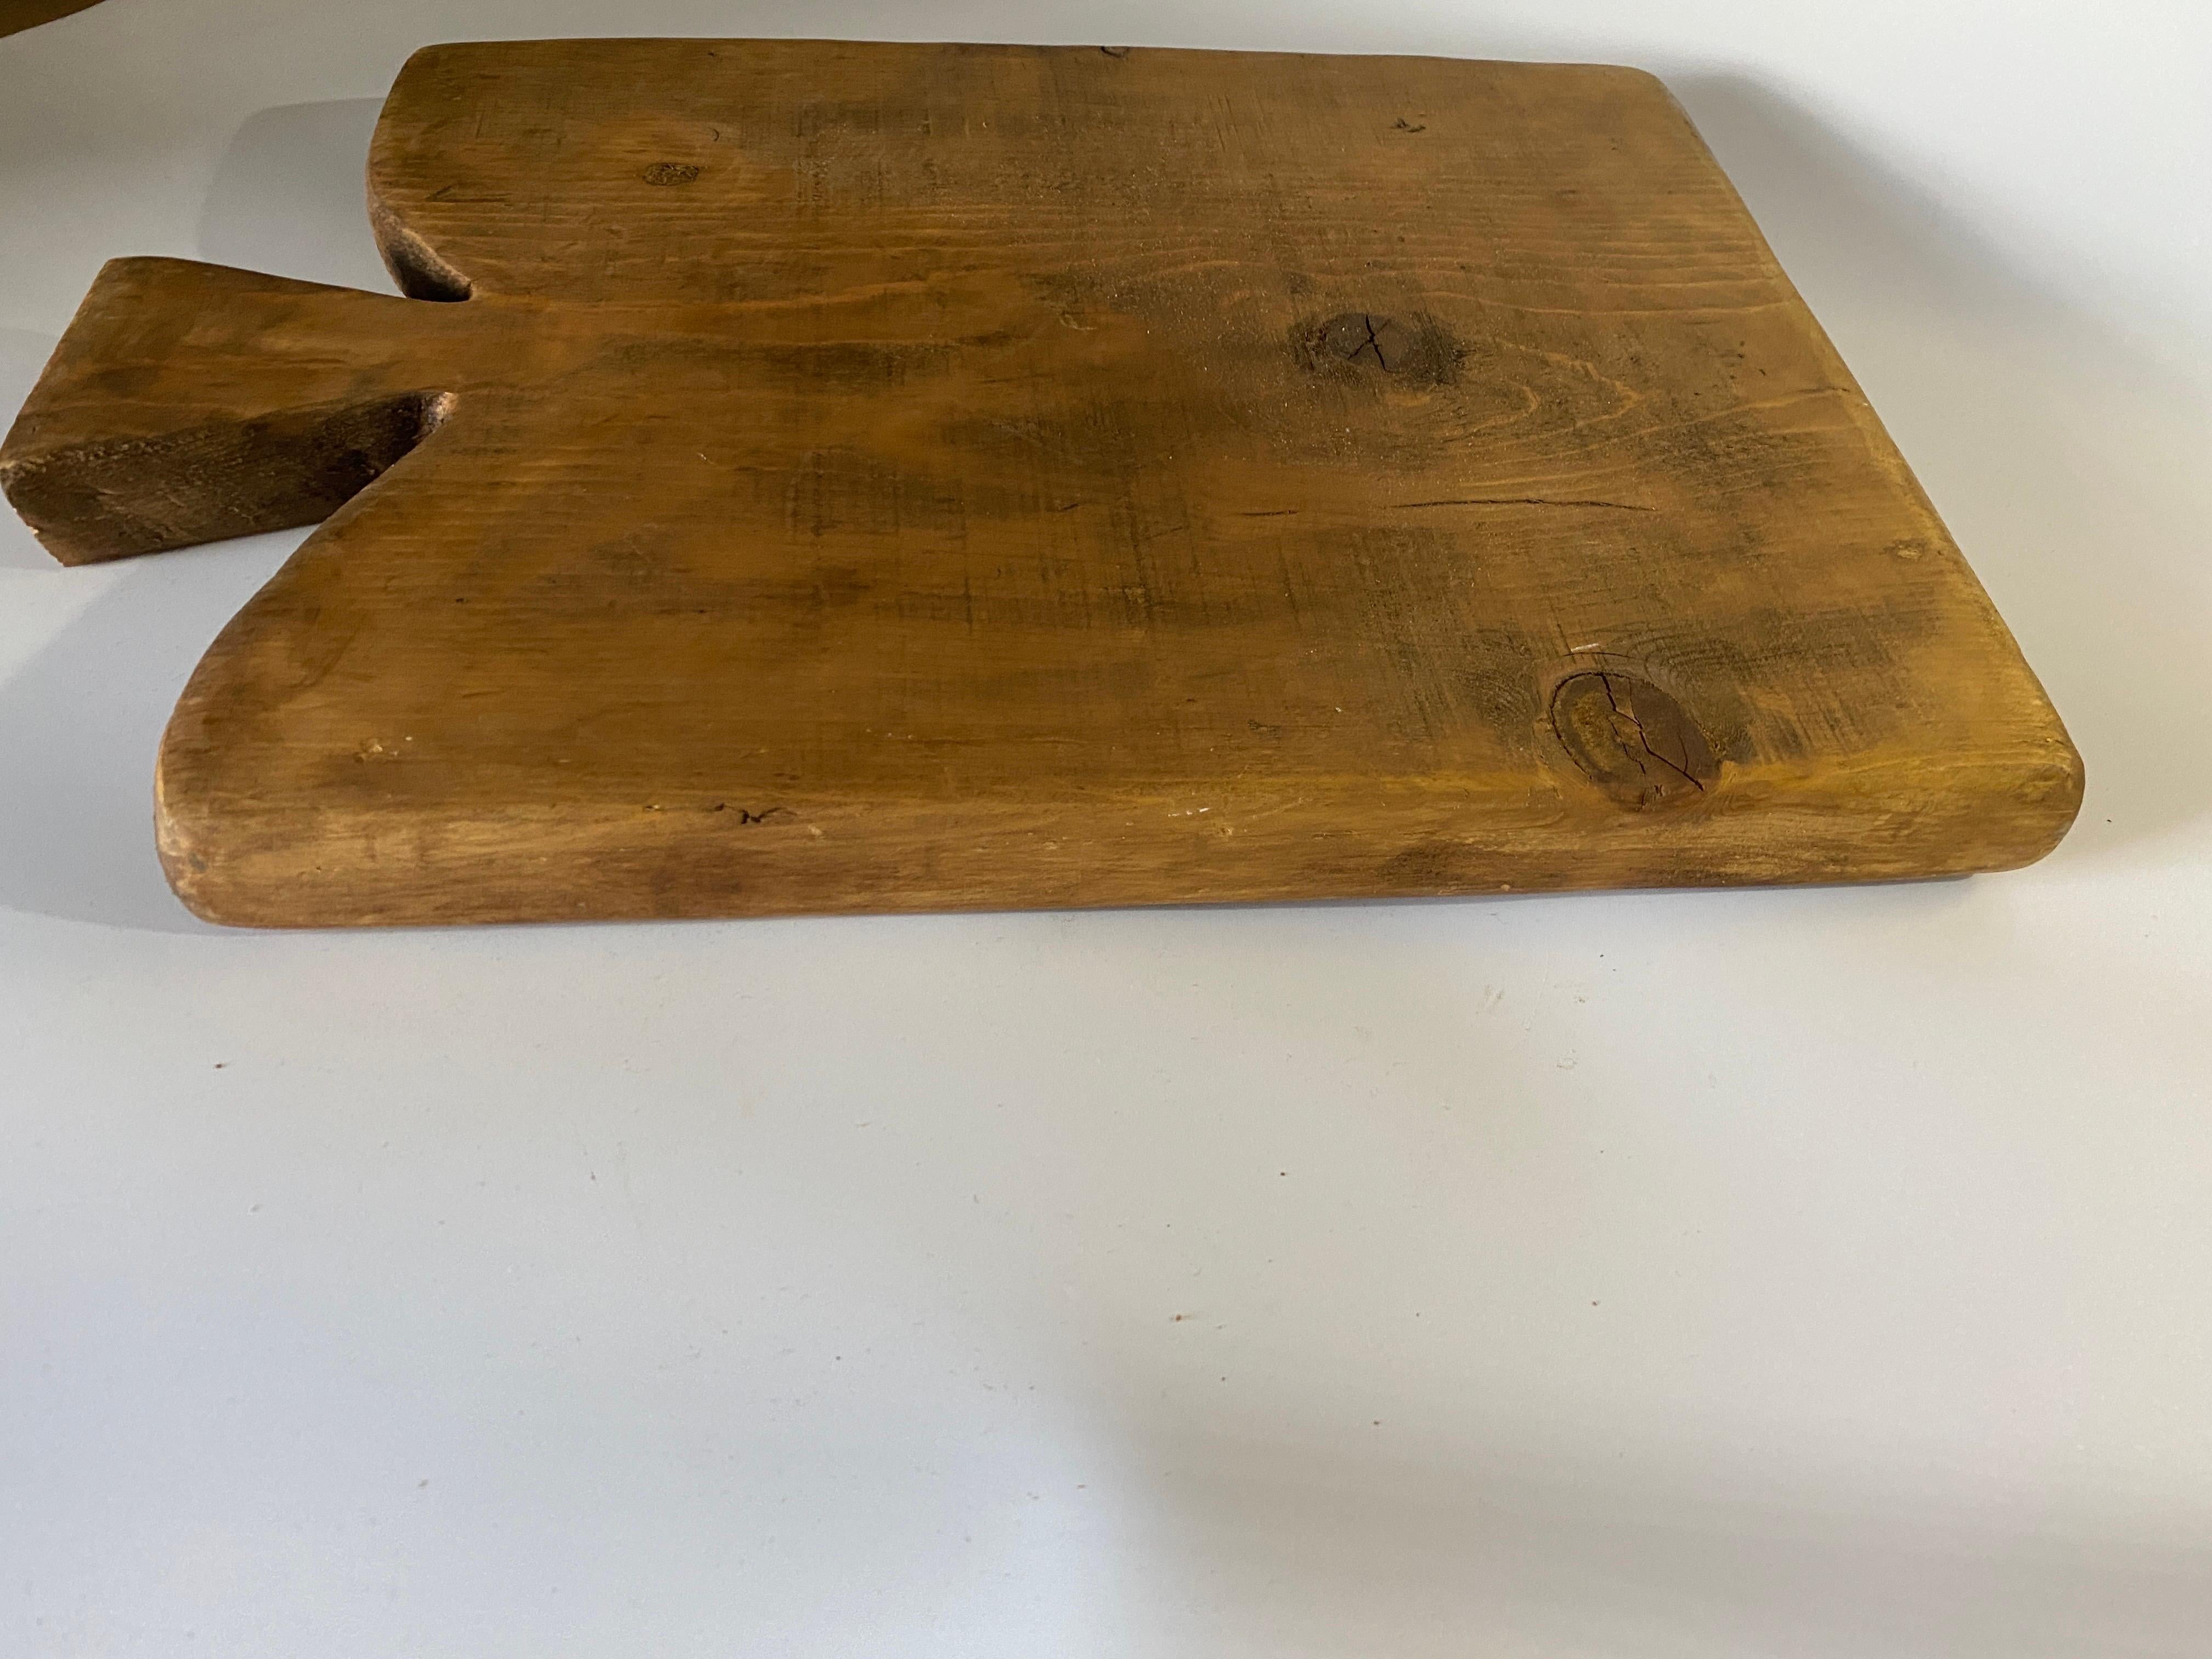 Century, Wooden Chopping or Cutting Board, Old Patina, Brown Color, French 19th  2